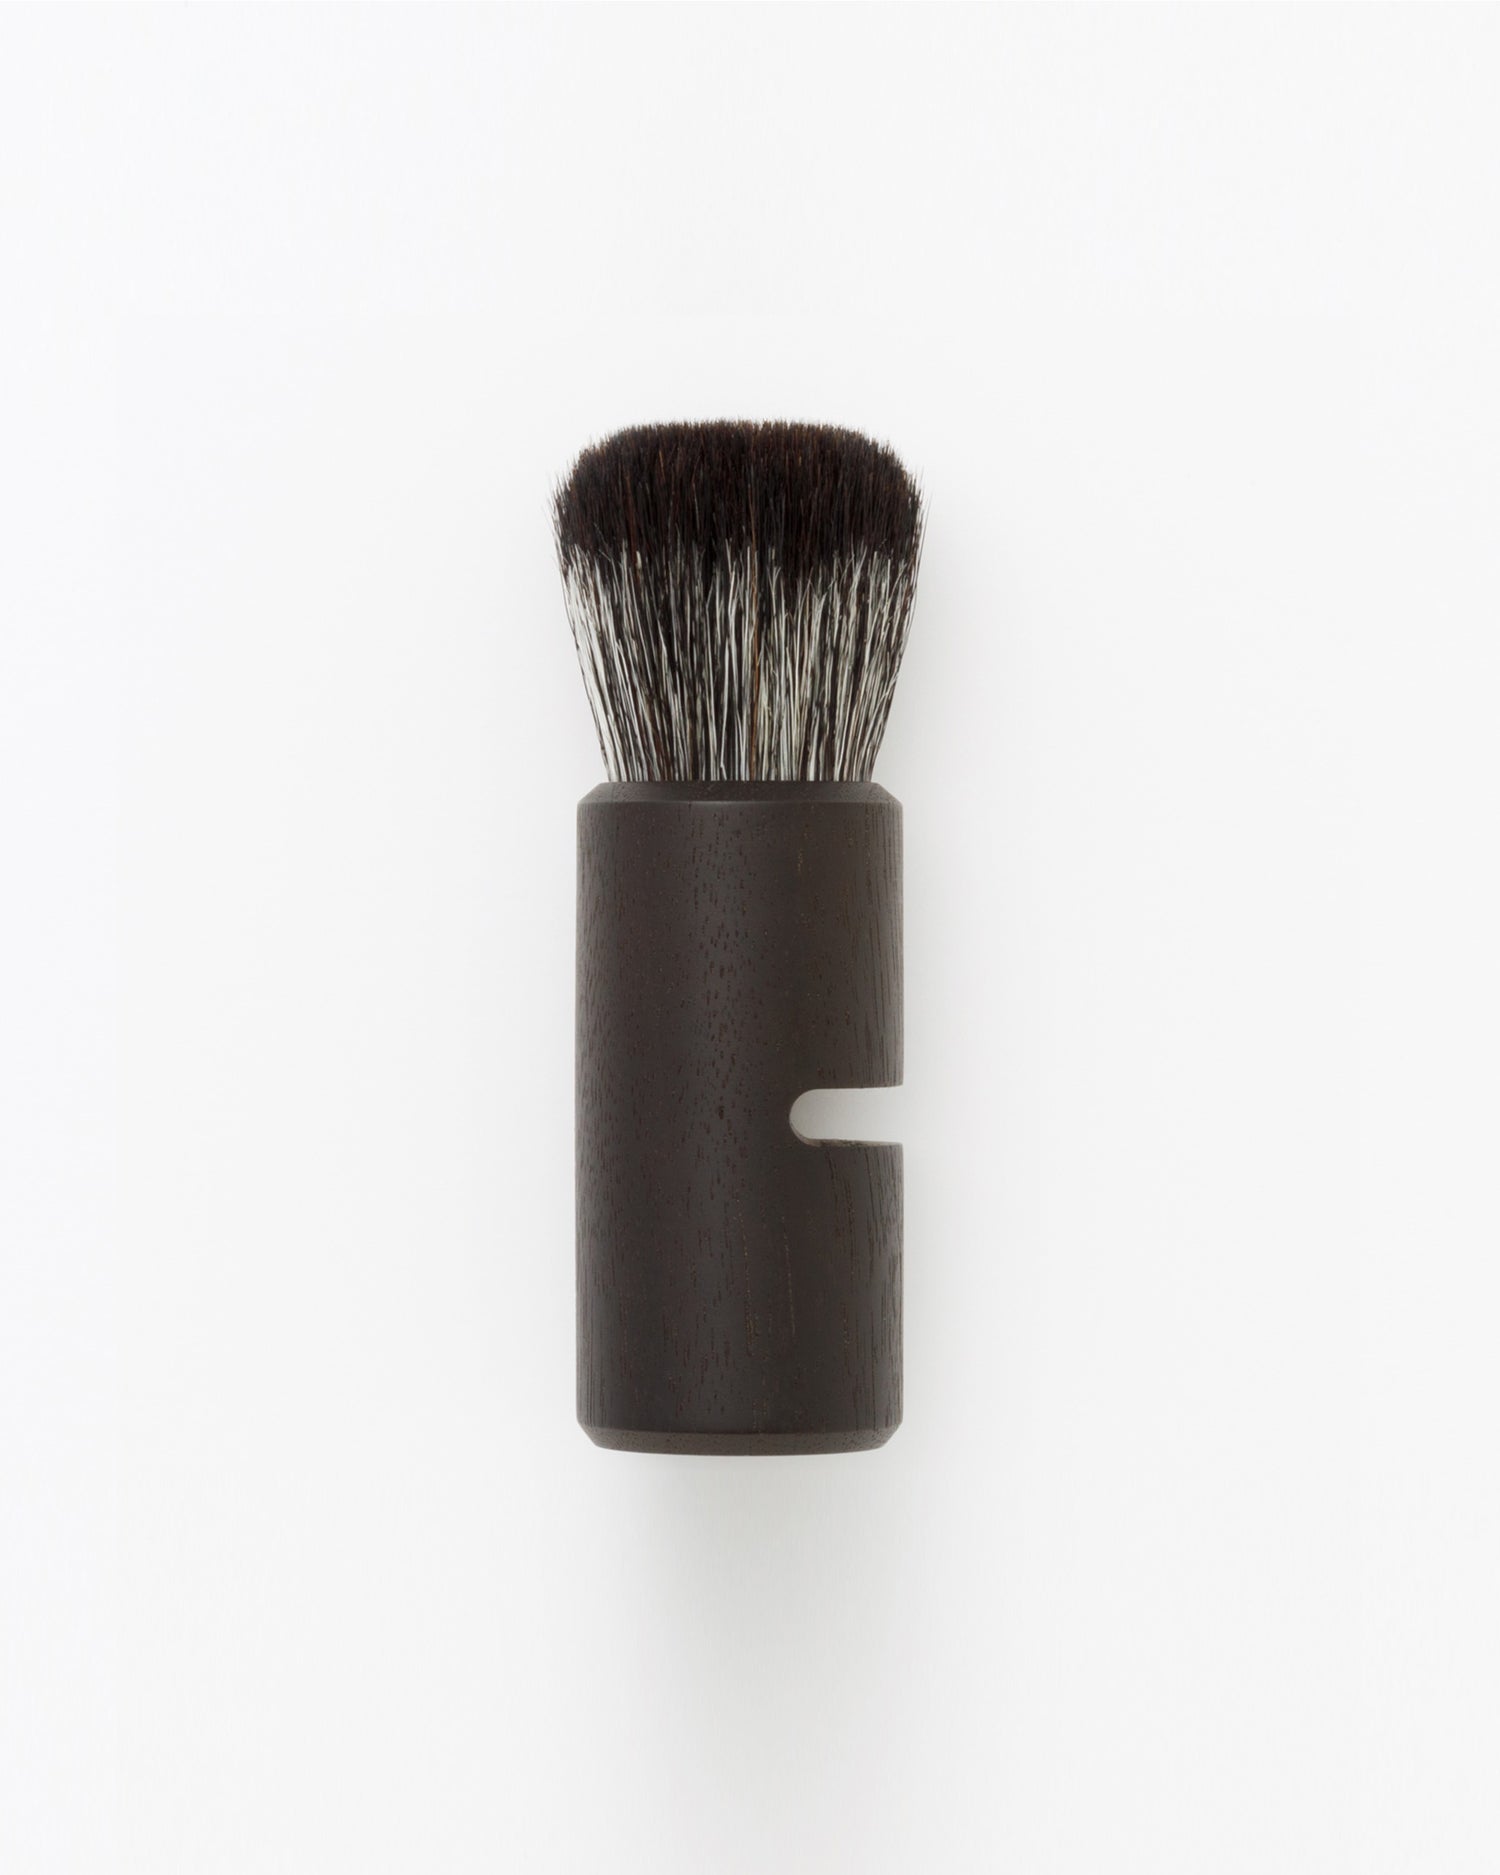 Silhouetted image of hard Jiva face cleansing and shaving series walnut, boar bristle, and goat hair brush by Shaquda against white-gray background. 